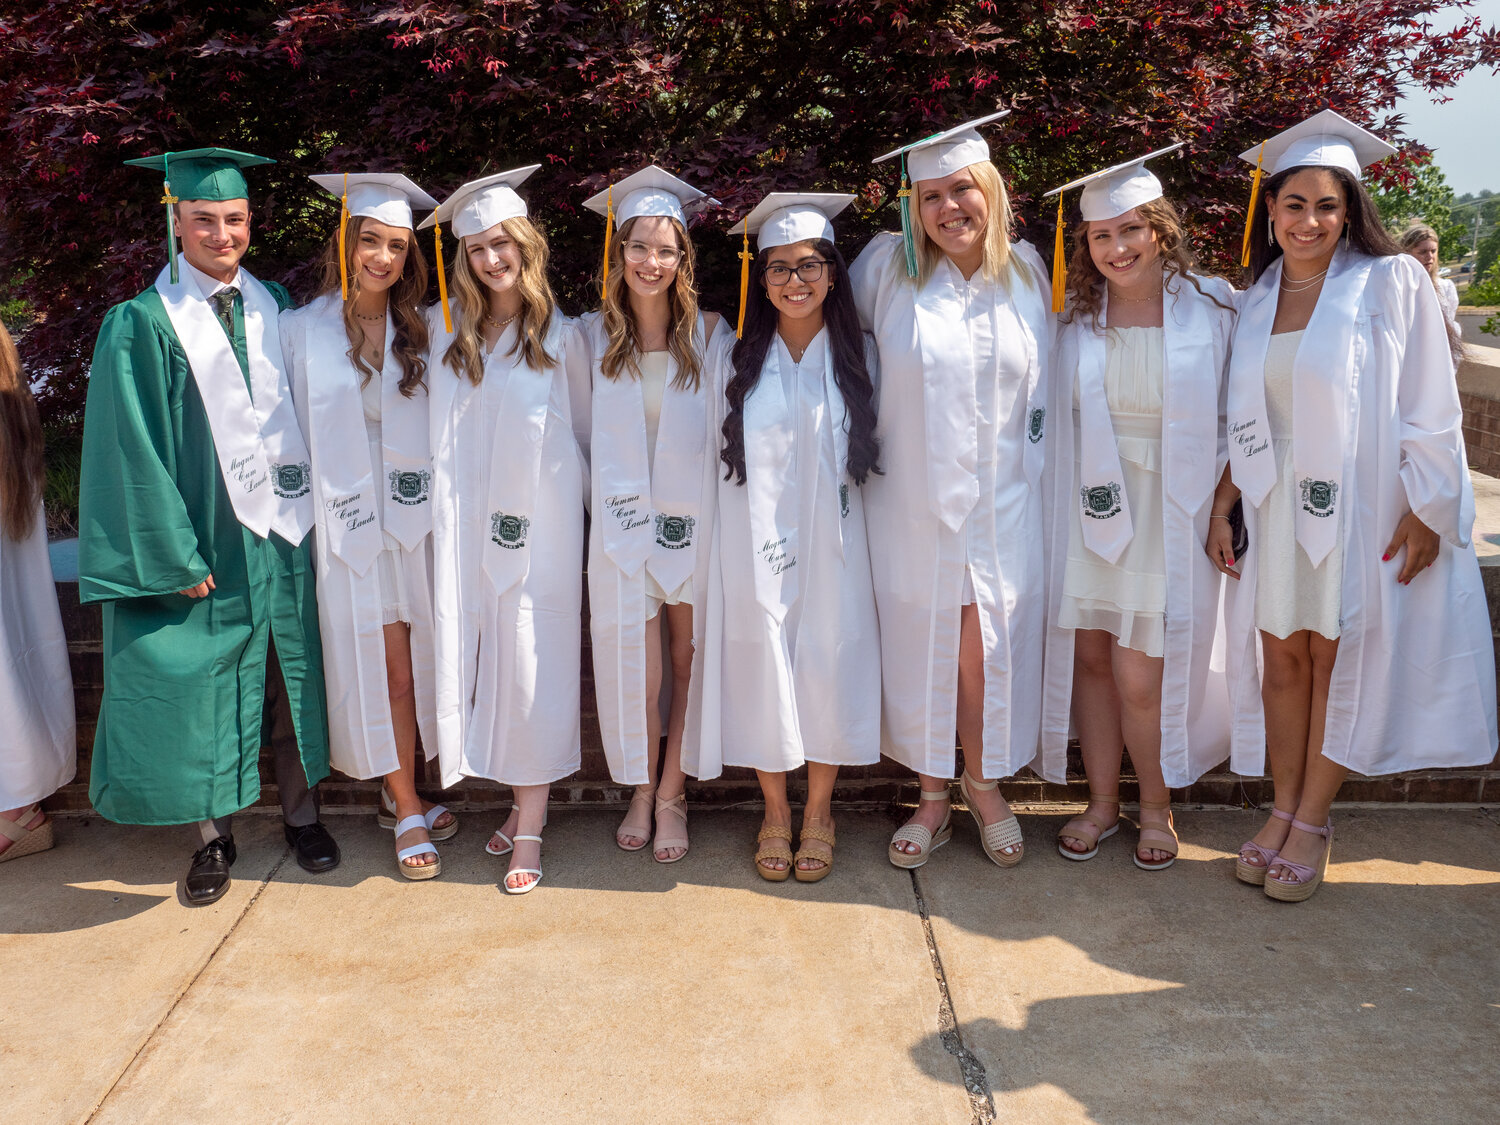 Members of the Pennridge High School Class of 2023 attend their graduation ceremony Tuesday at Stabler Arena.